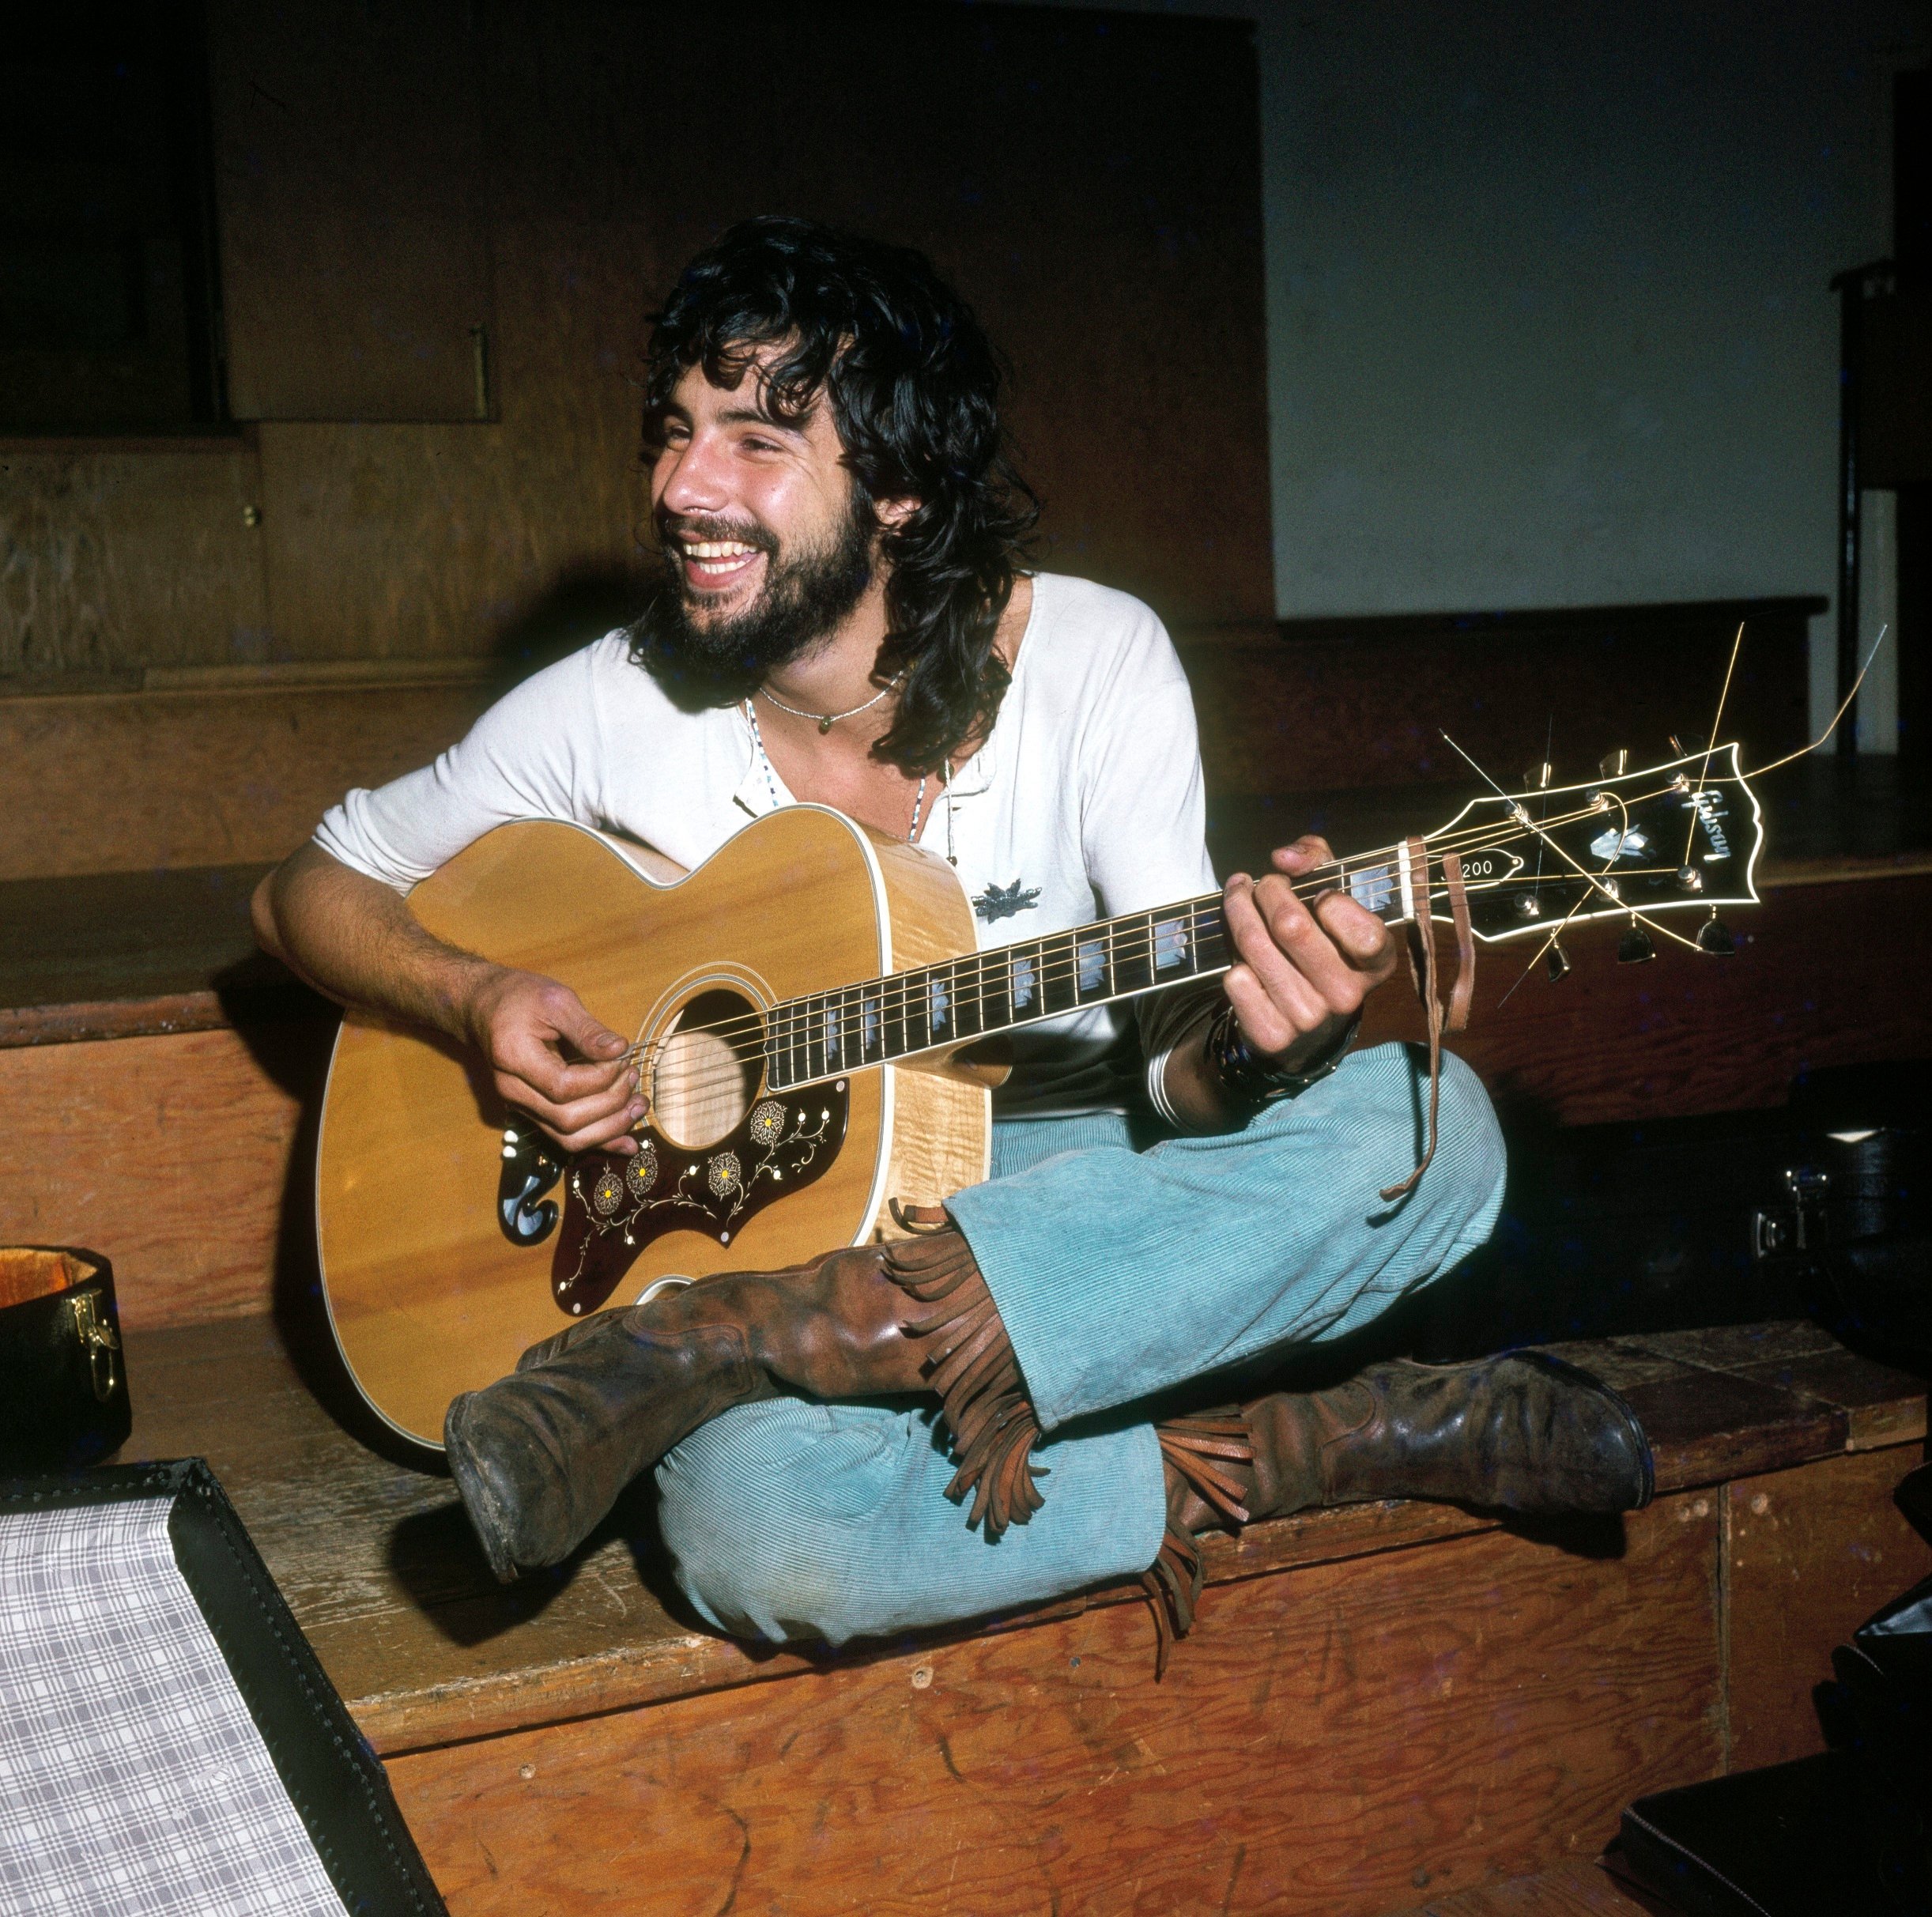 Cat Stevens playing songs on a guitar